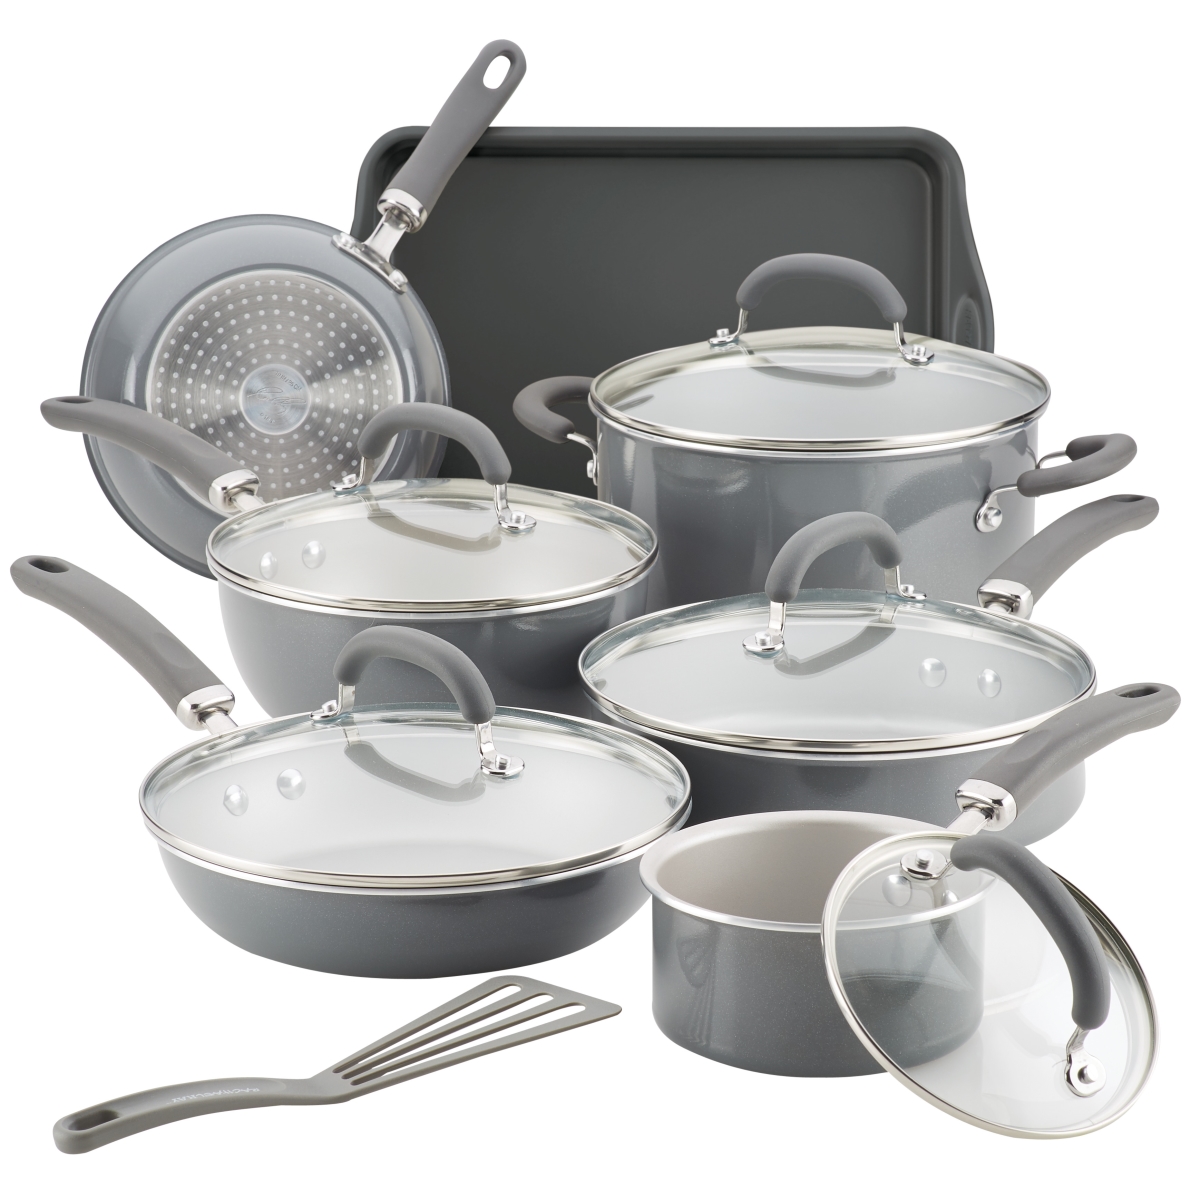 Picture of Rachael Ray 12148 Create Delicious Aluminum Nonstick Cookware Set, 13 Piece - Gray Shimmer